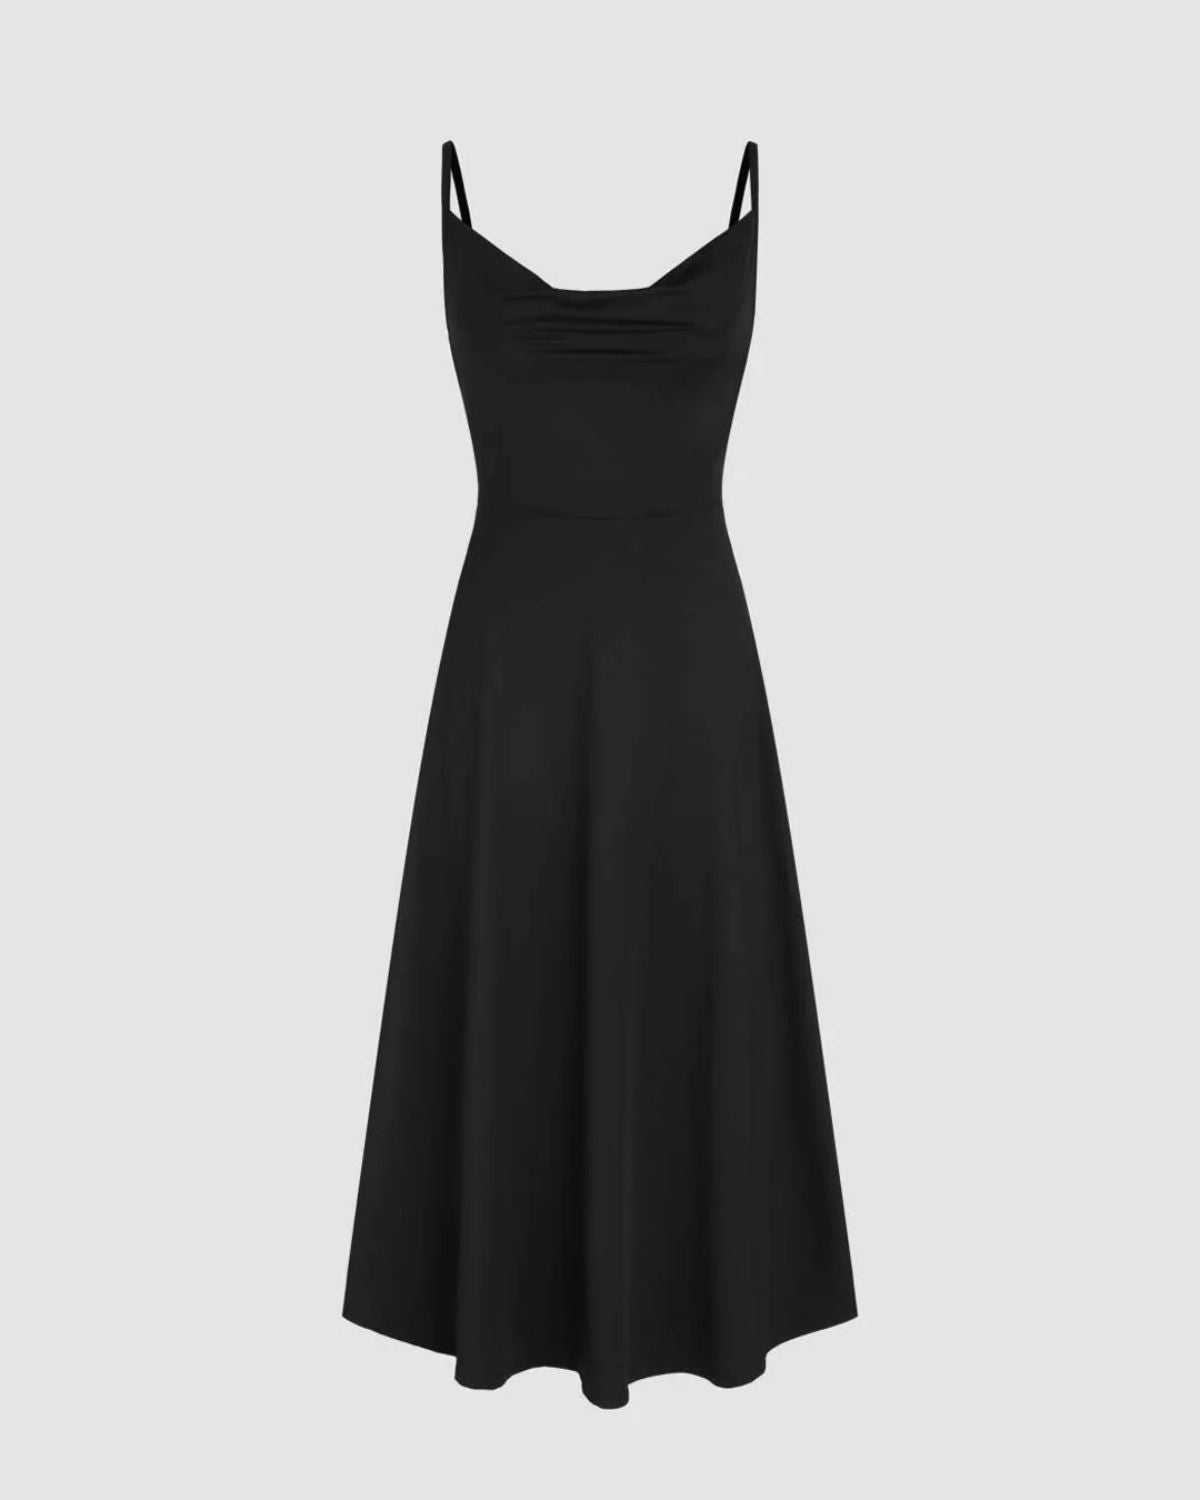 COWL NECK FIT AND FLARE DRESS